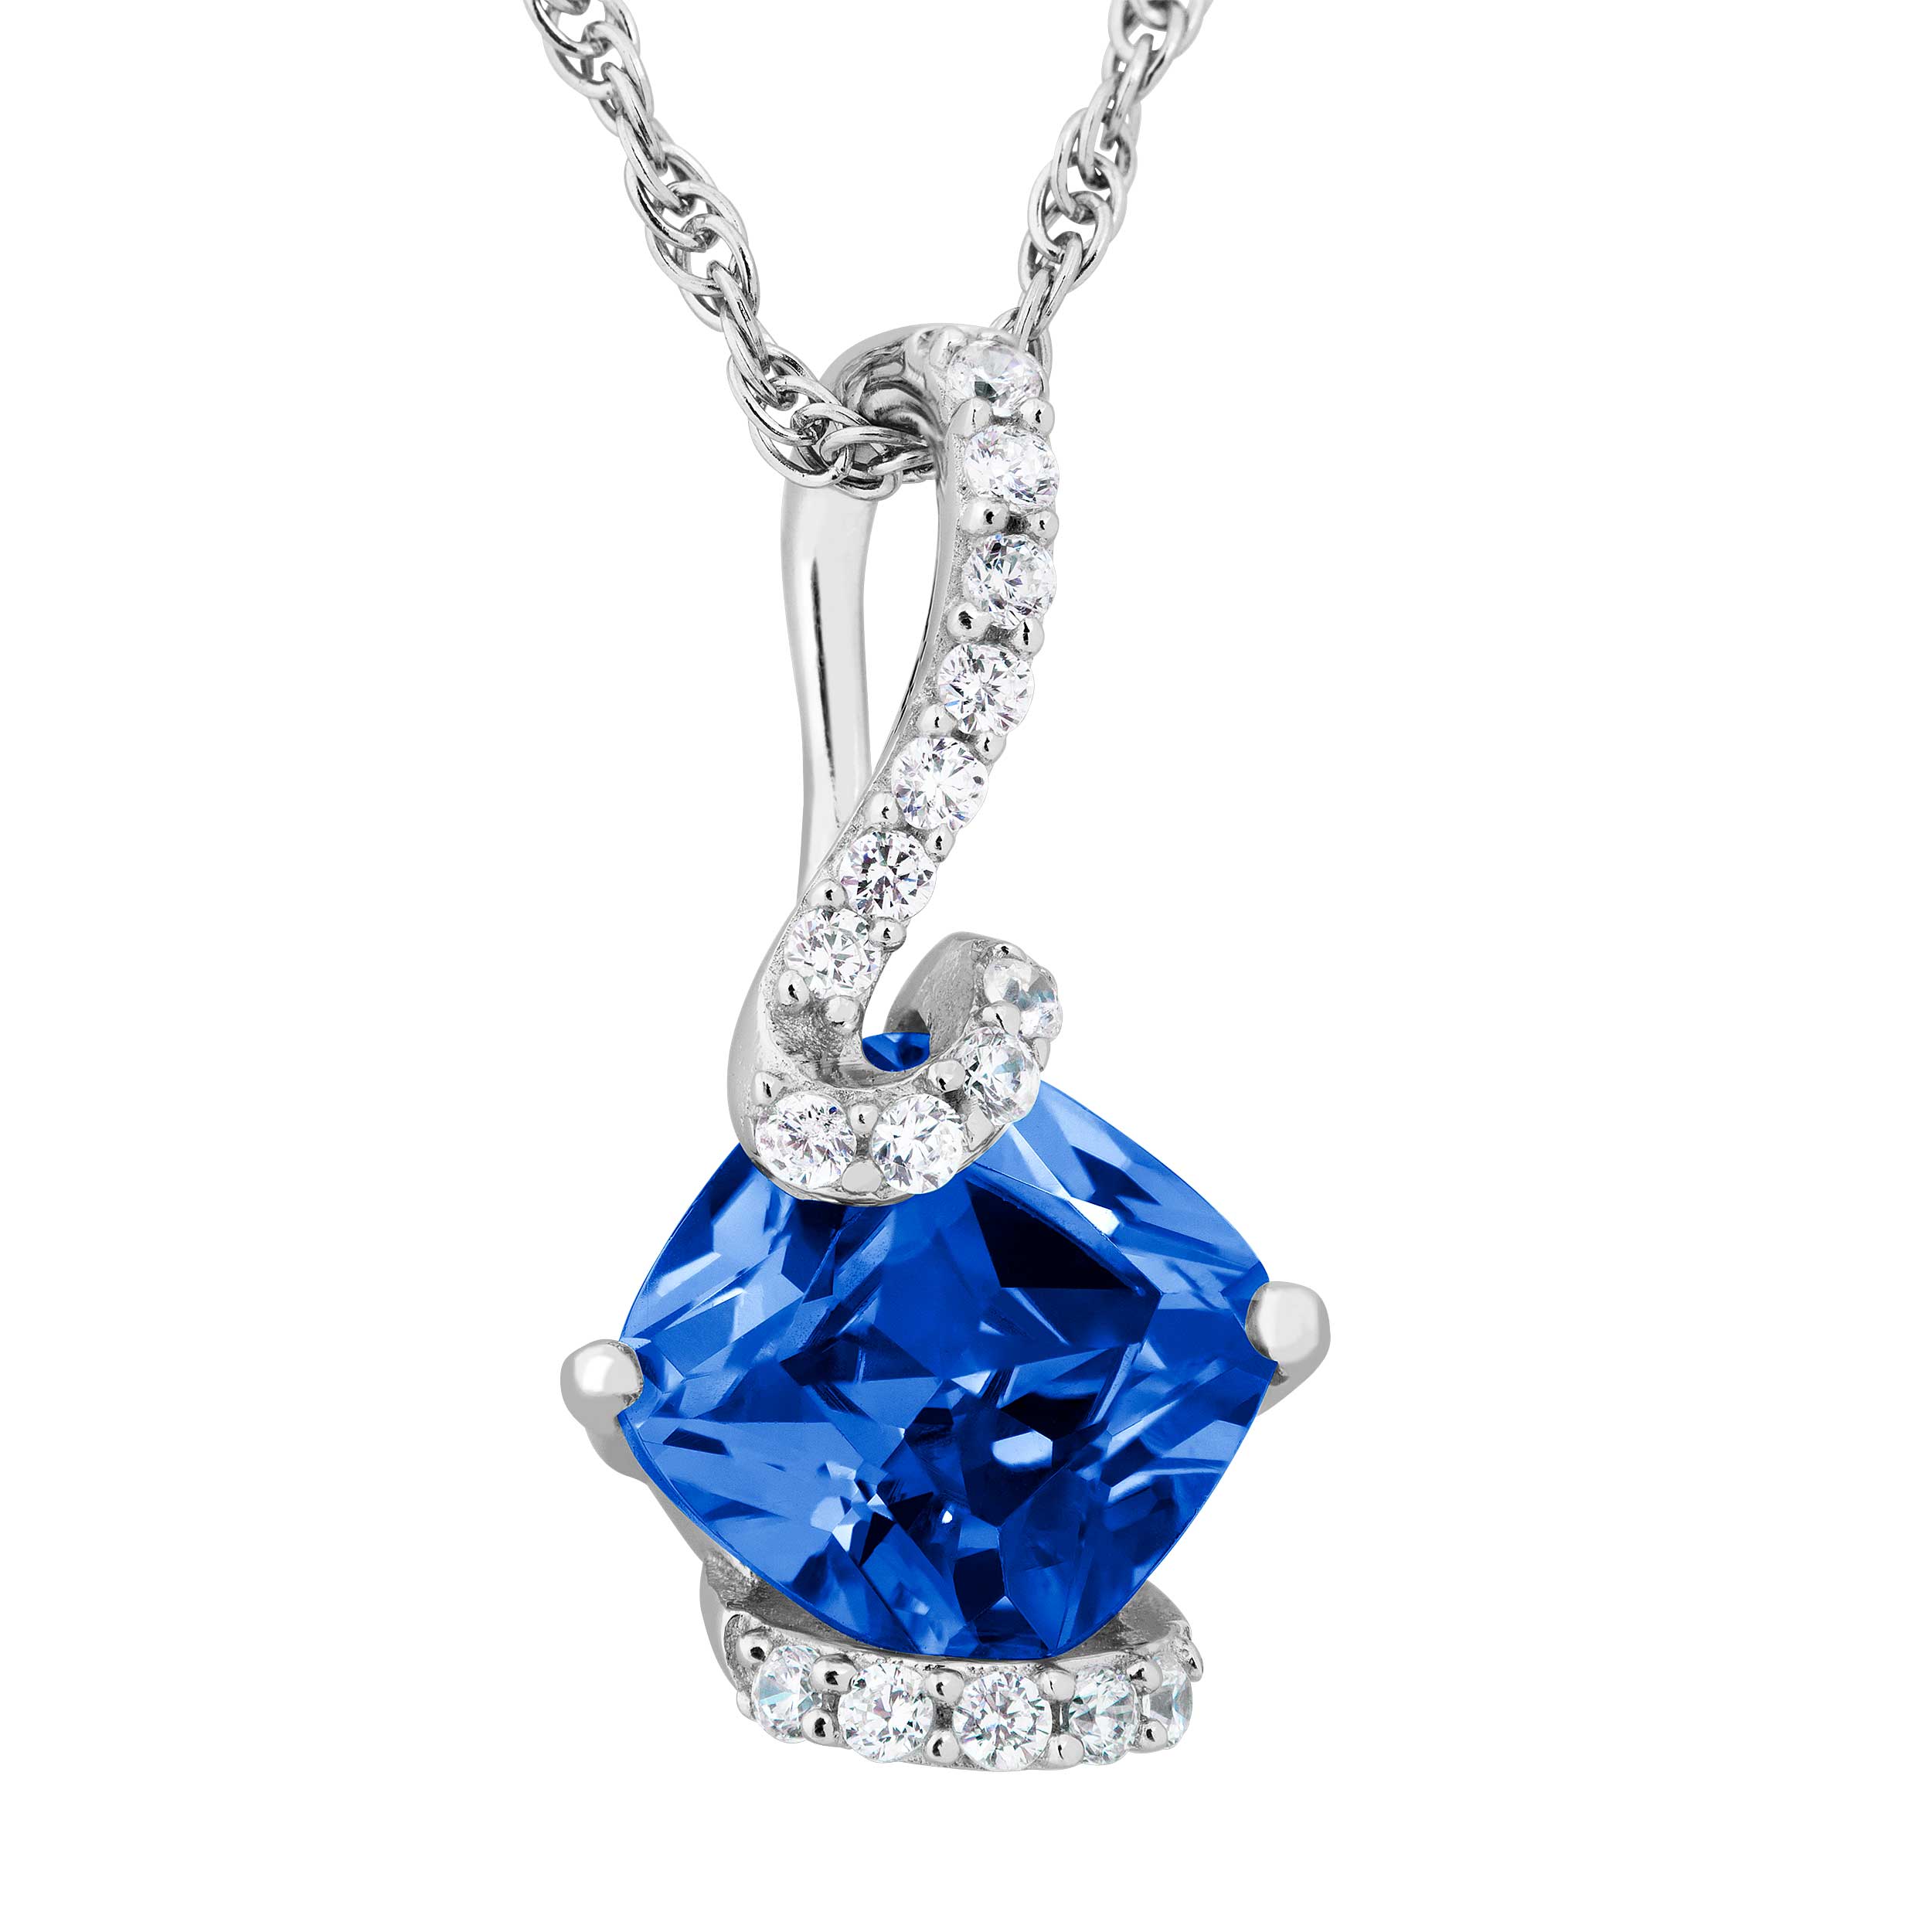 Cushion-Cut Created Blue Sapphire and White Topaz Pendant Necklace, Rhodium Plated Sterling Silver